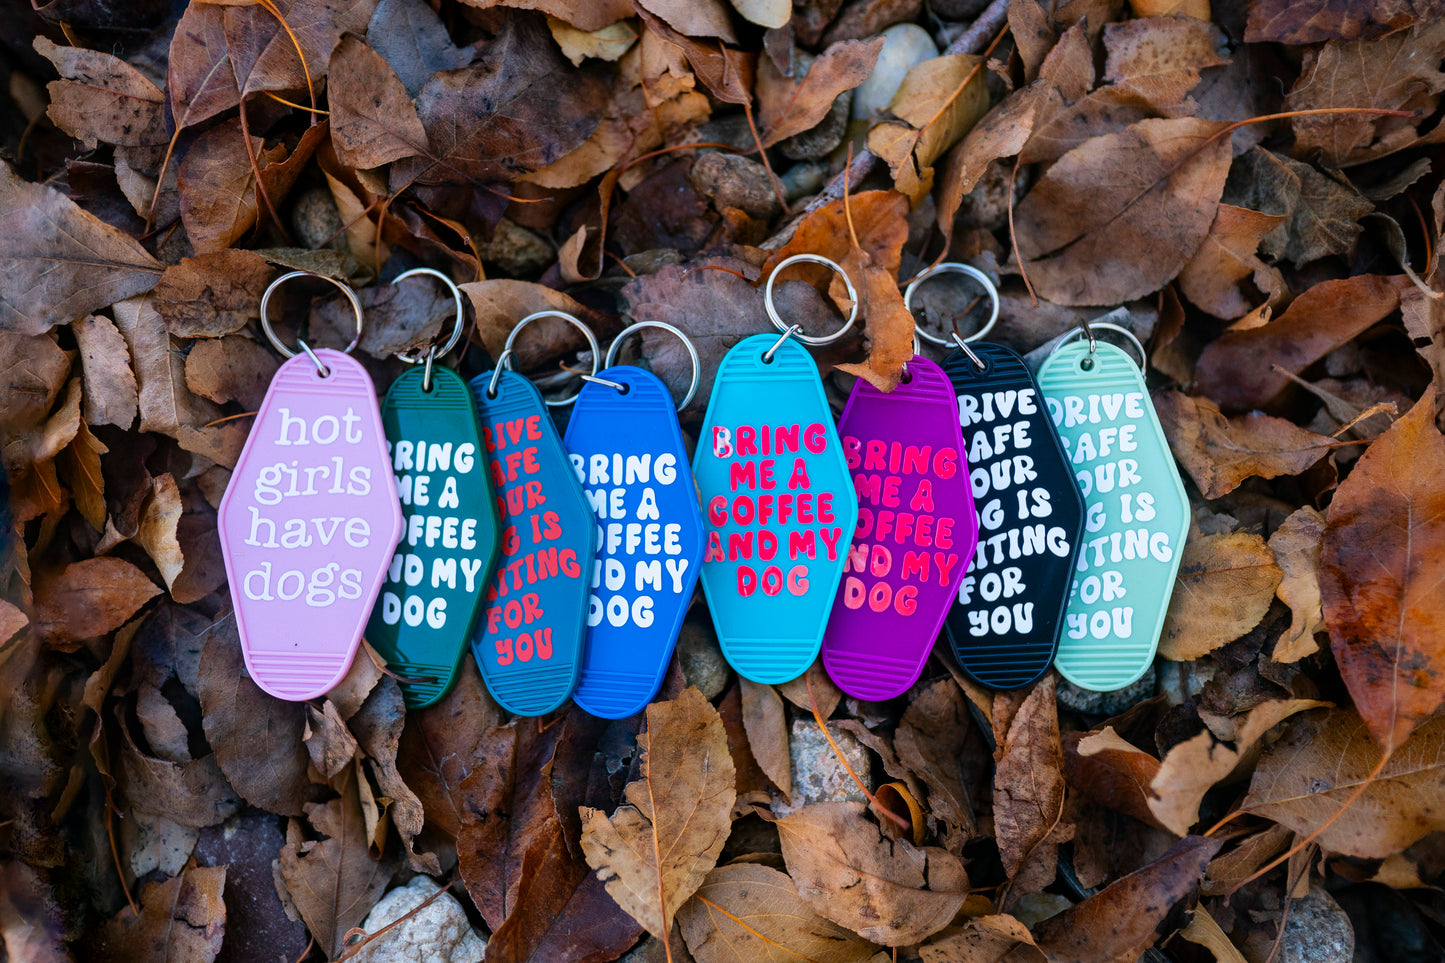 Hot Girls Have Dogs keychain